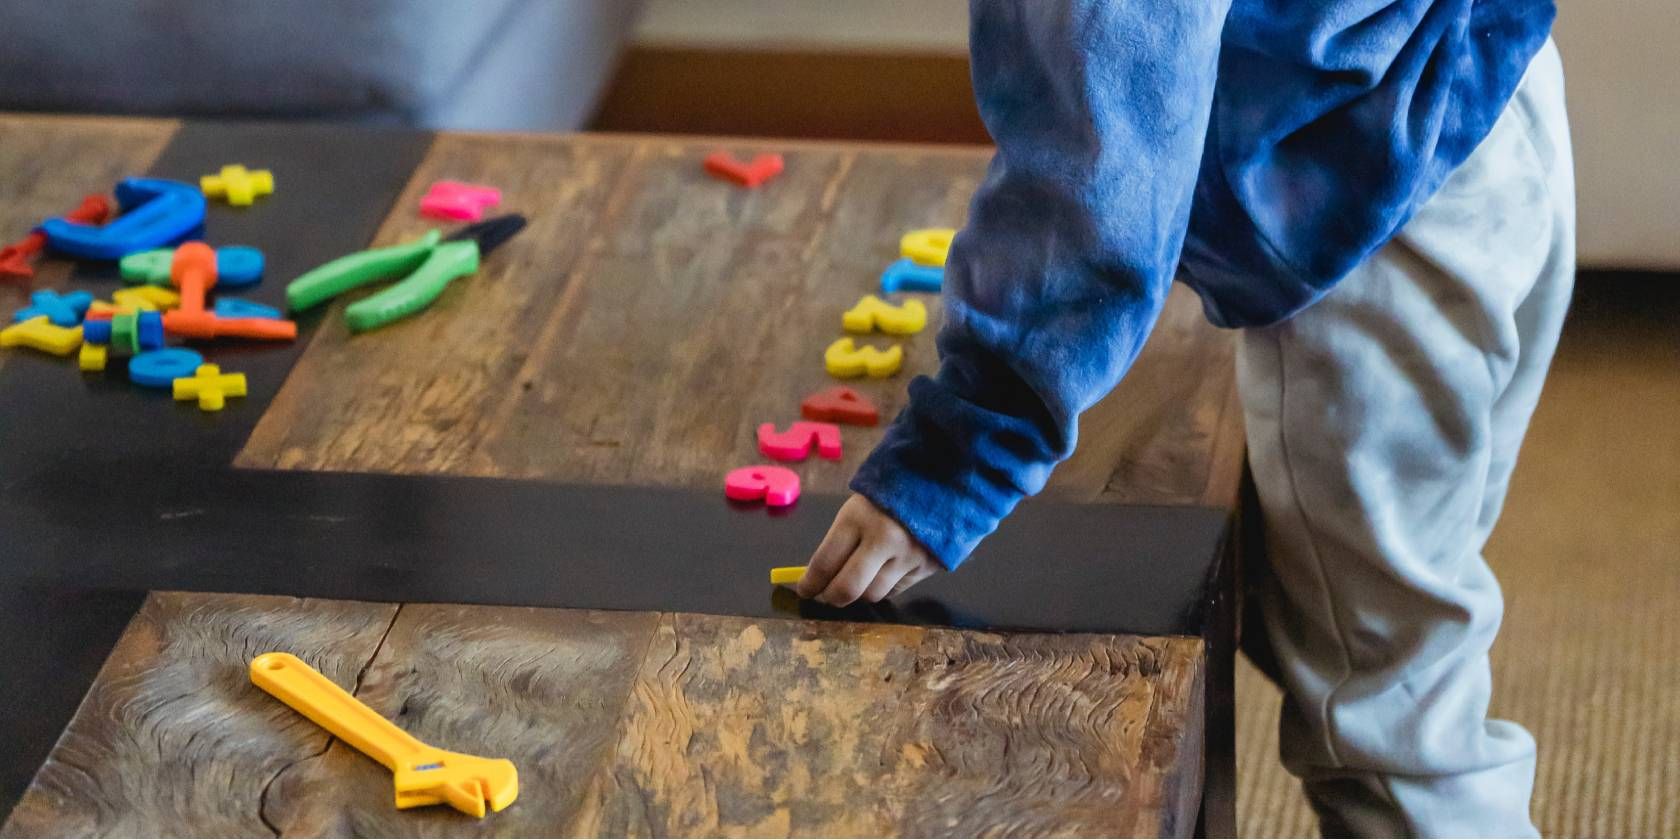 Child Sorting Numbers on a Table